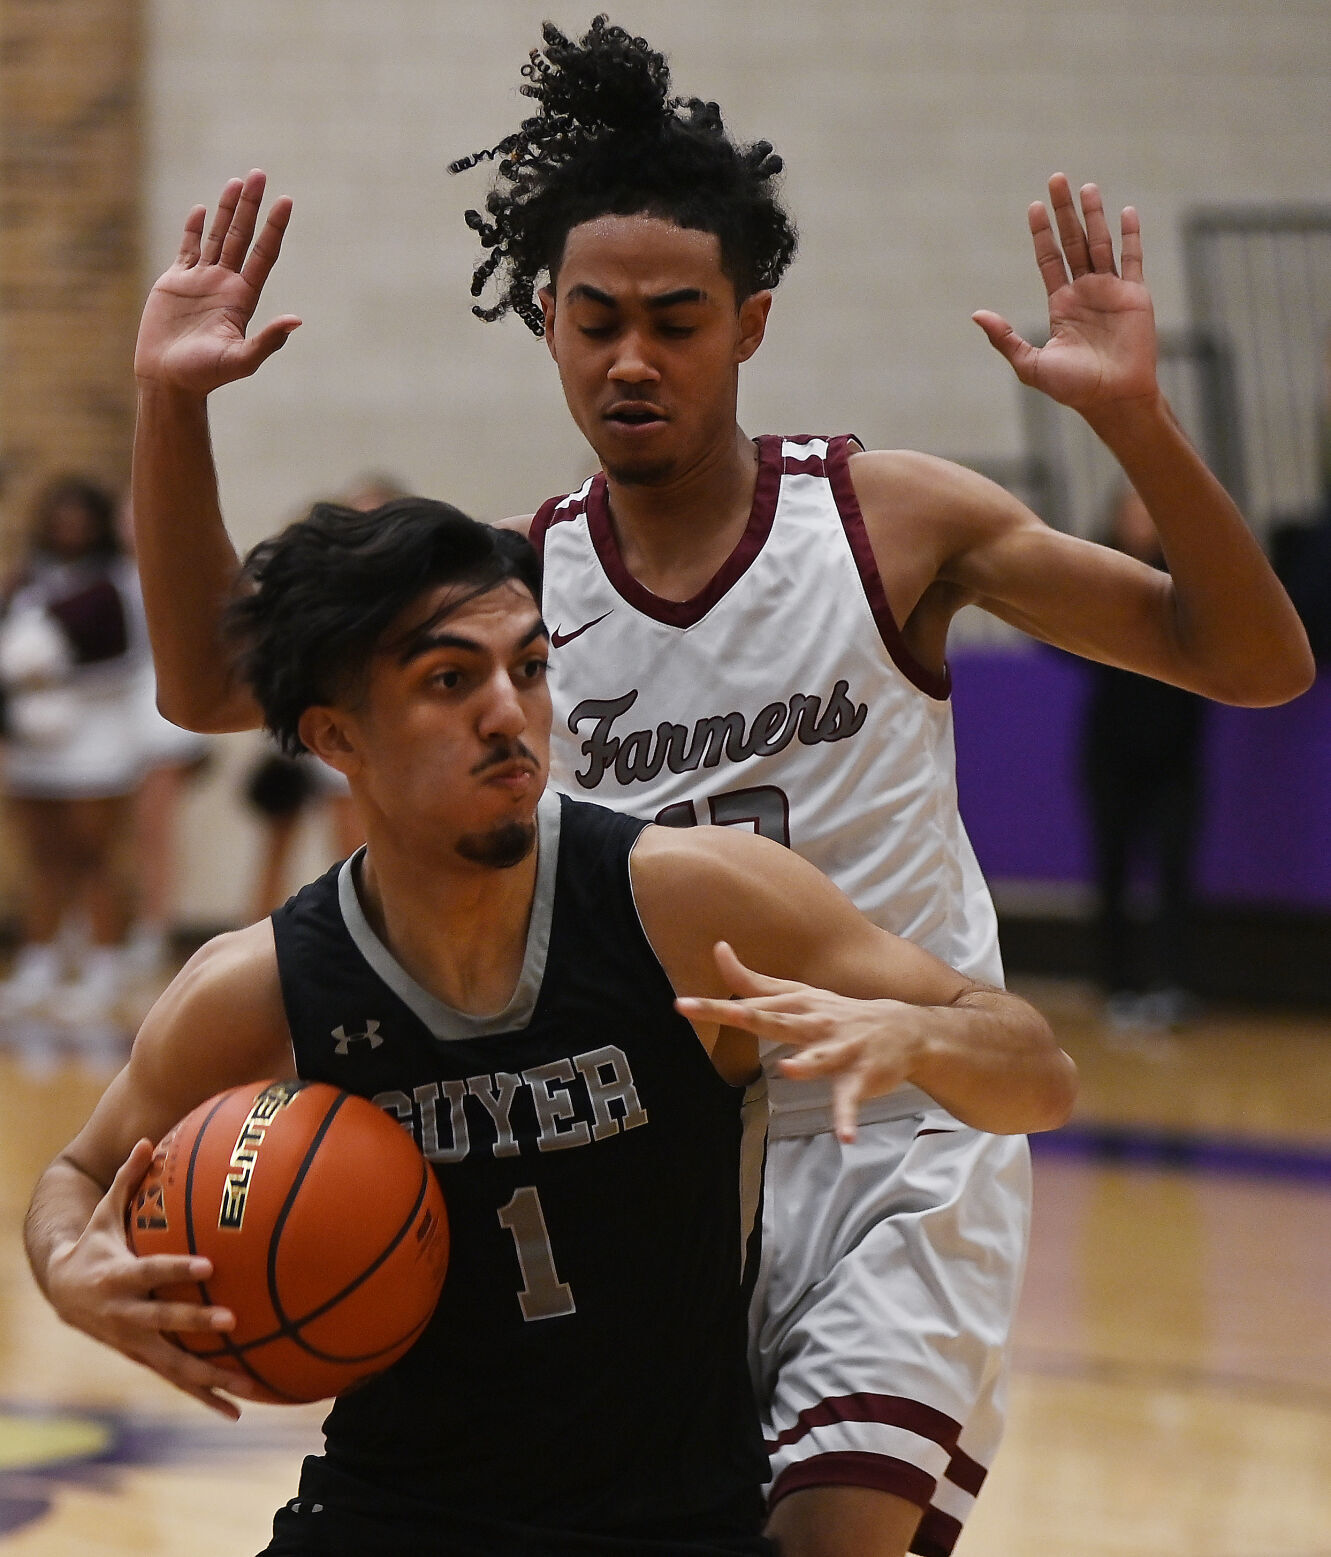 Lewisville Wins Thrilling Overtime Playoff Game Against Guyer in Region I-6A Clash